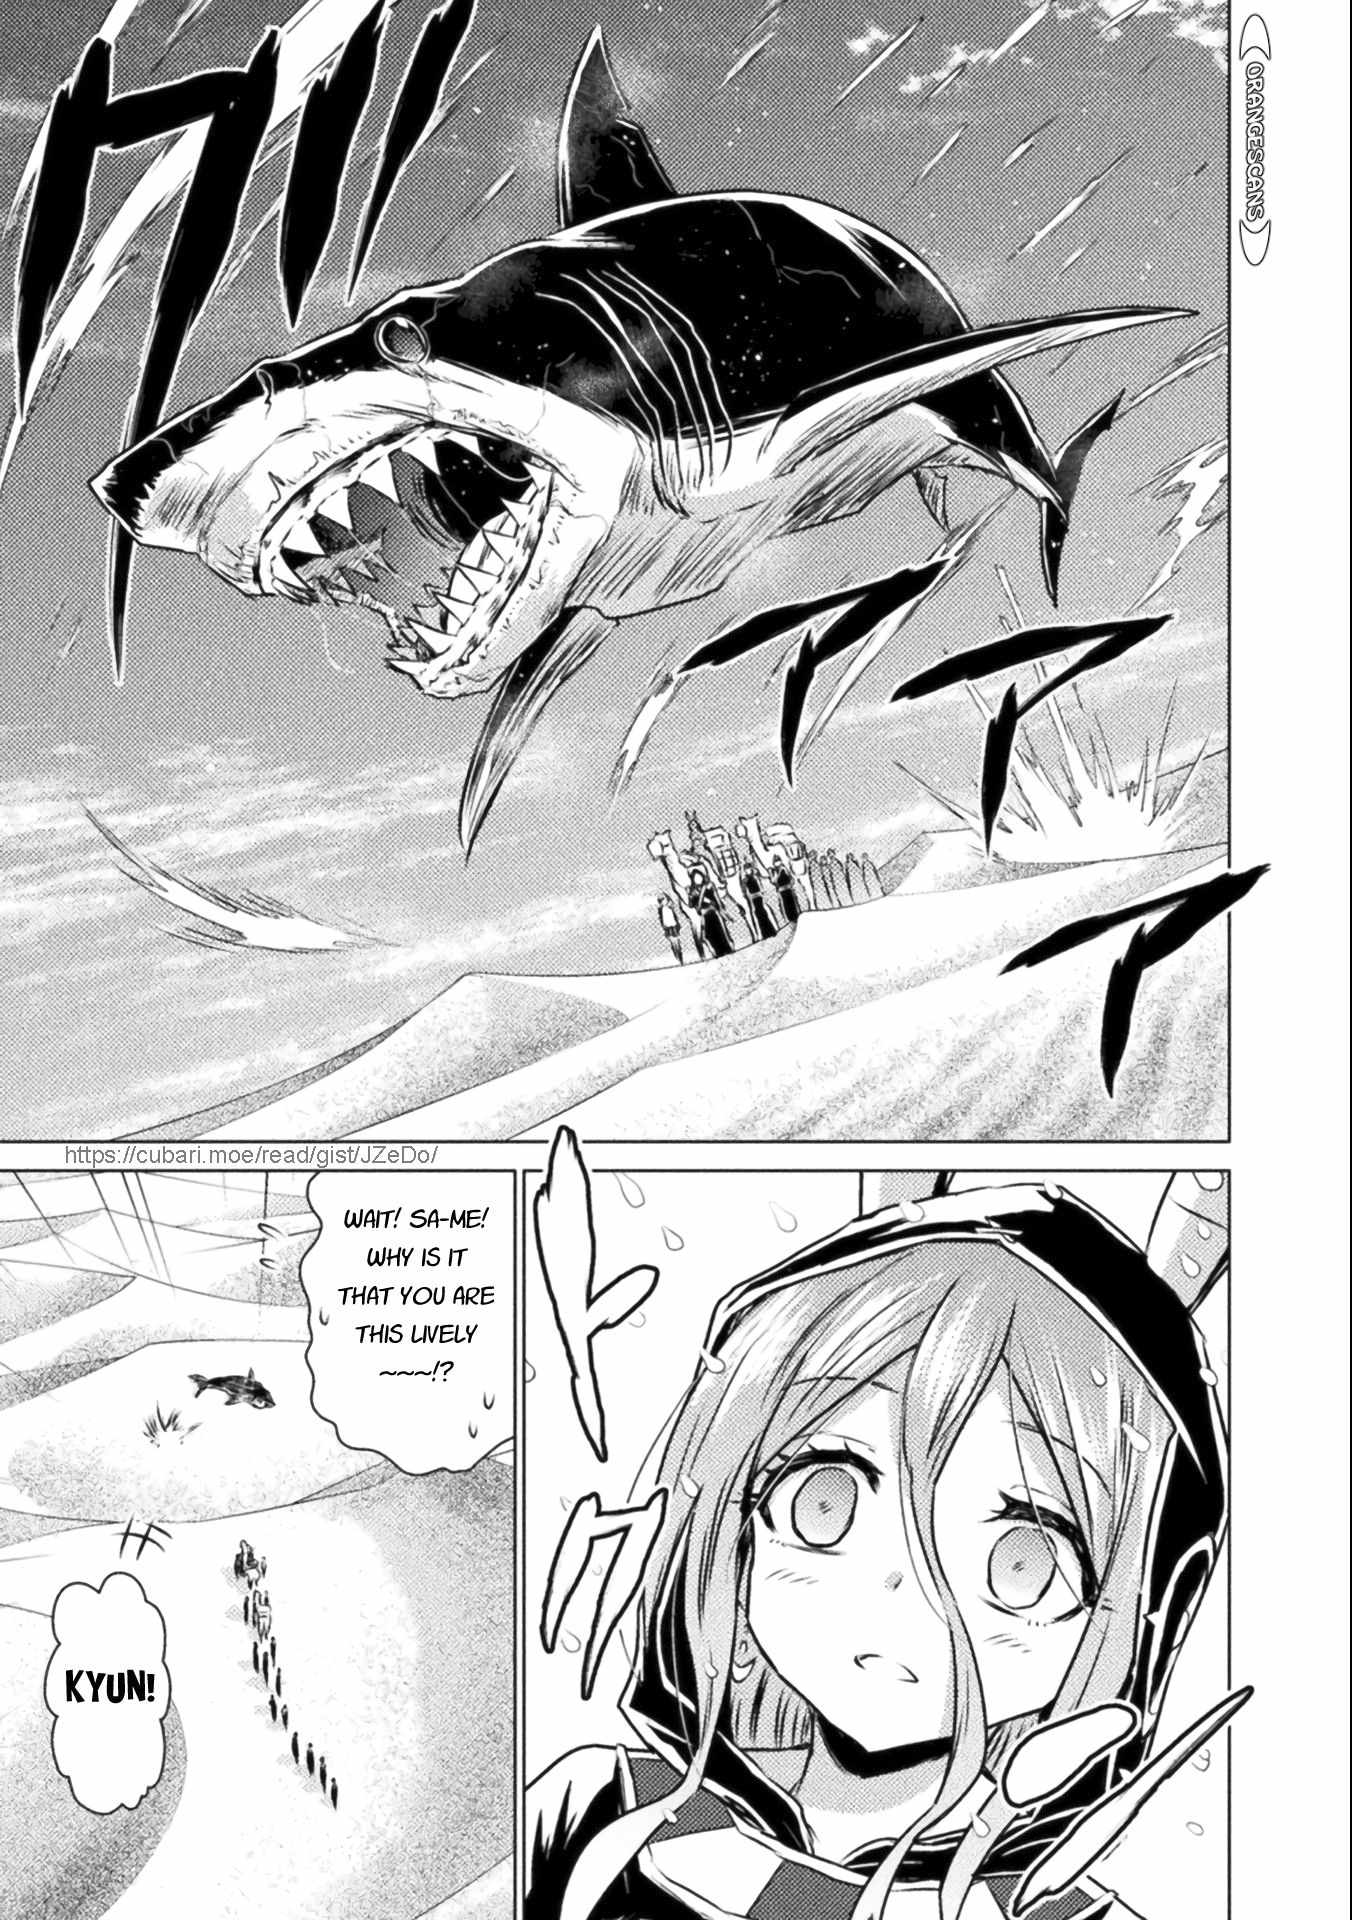 Killer Shark In Another World - 14 page 15-05cf8955